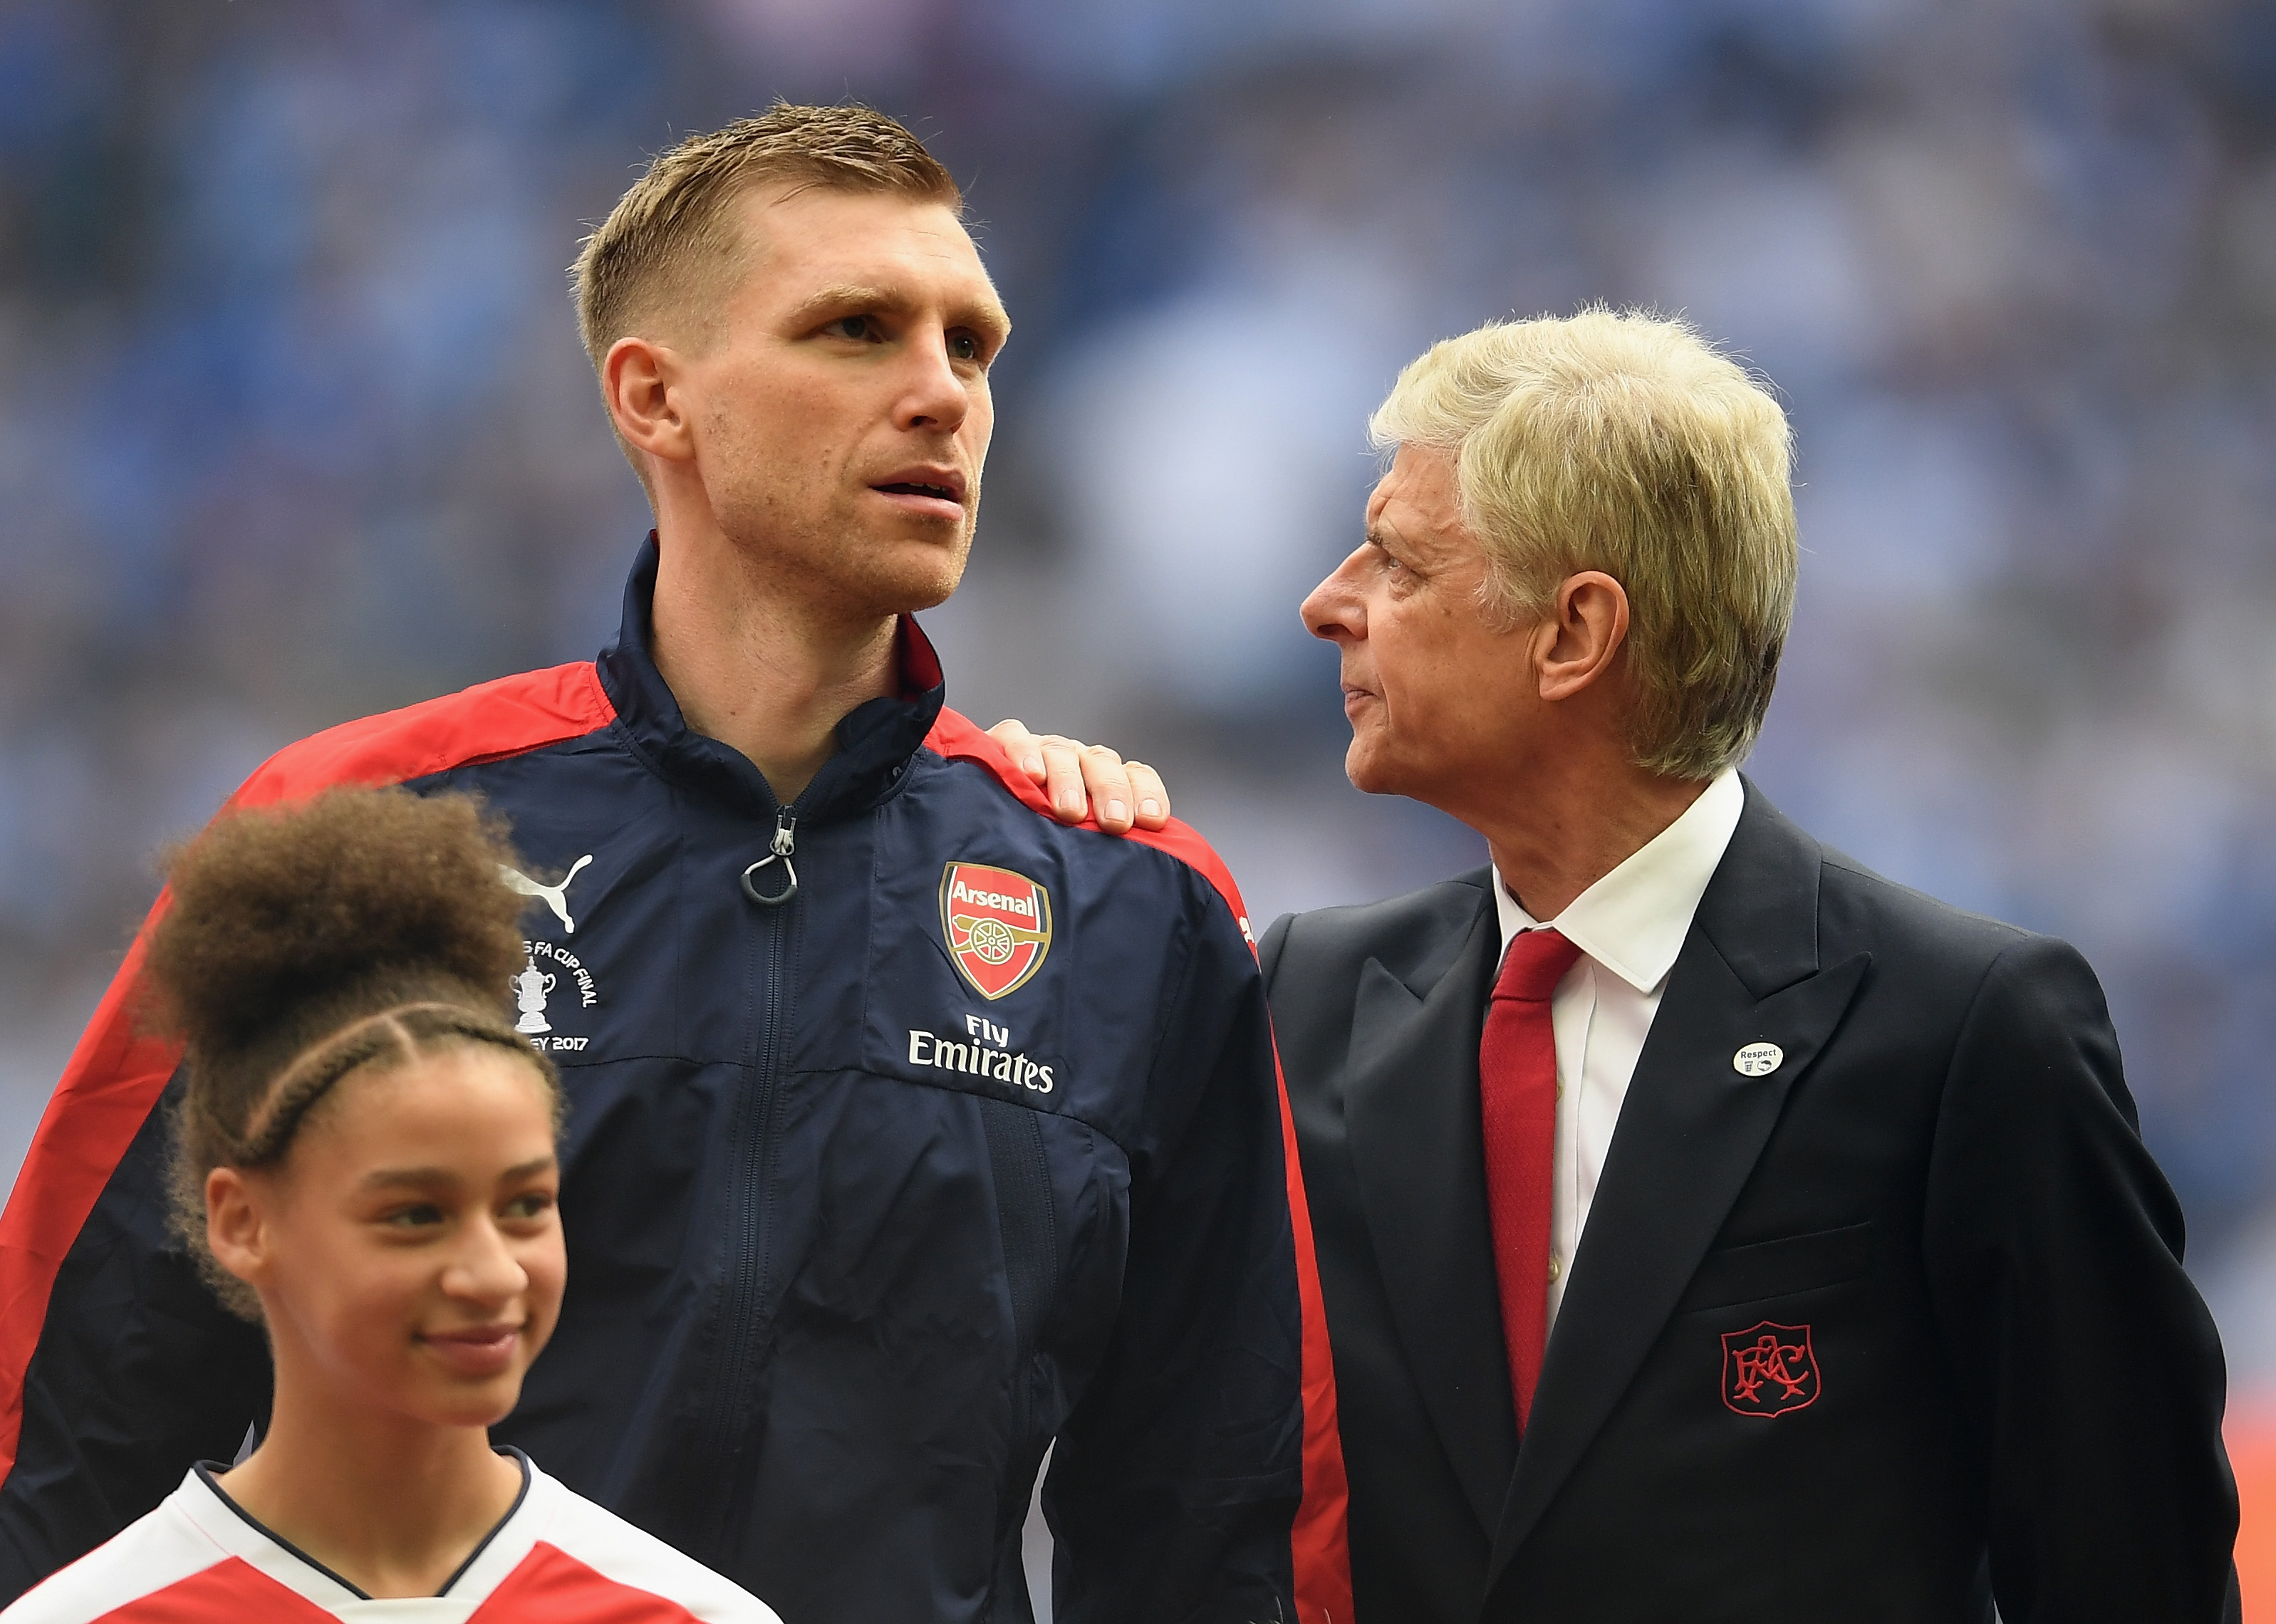 LONDON, ENGLAND - MAY 27:  Per Mertesacker of Arsenal and Arsene Wenger, Manager of Arsenal speak prior to The Emirates FA Cup Final between Arsenal and Chelsea at Wembley Stadium on May 27, 2017 in London, England.  (Photo by Laurence Griffiths/Getty Images)